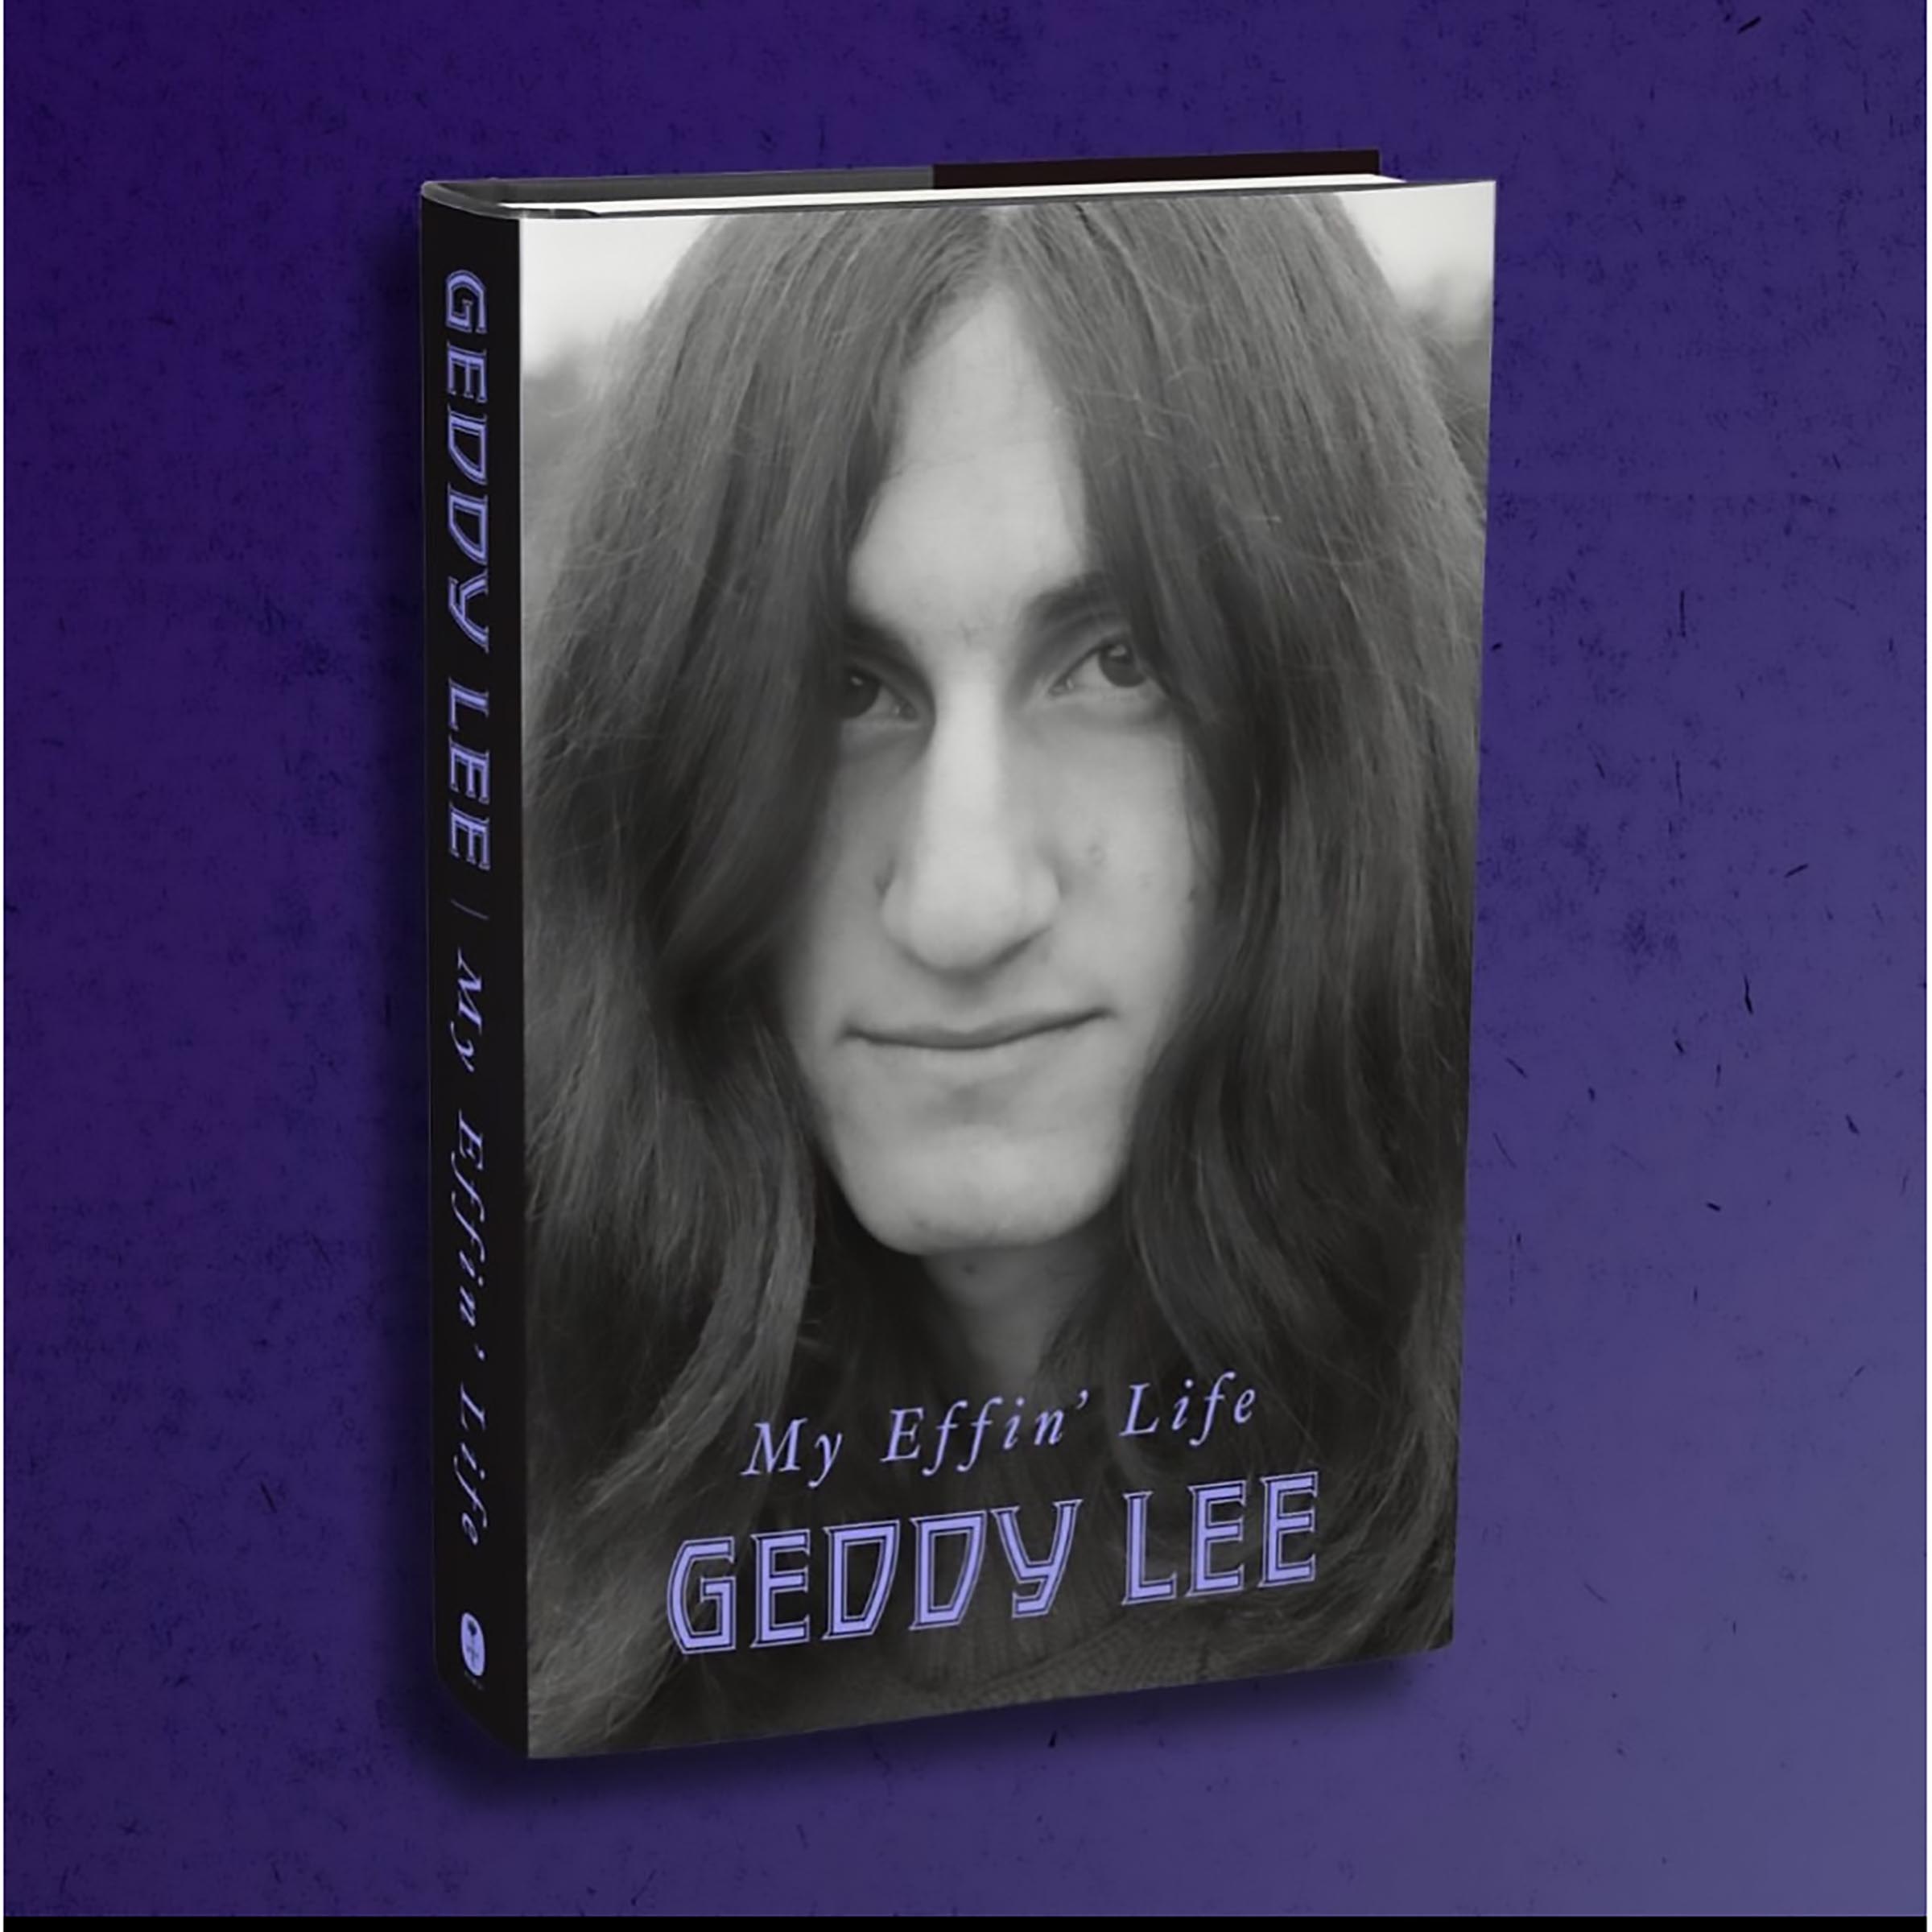 Geddy Lee, Musician, Wine Lover, Author